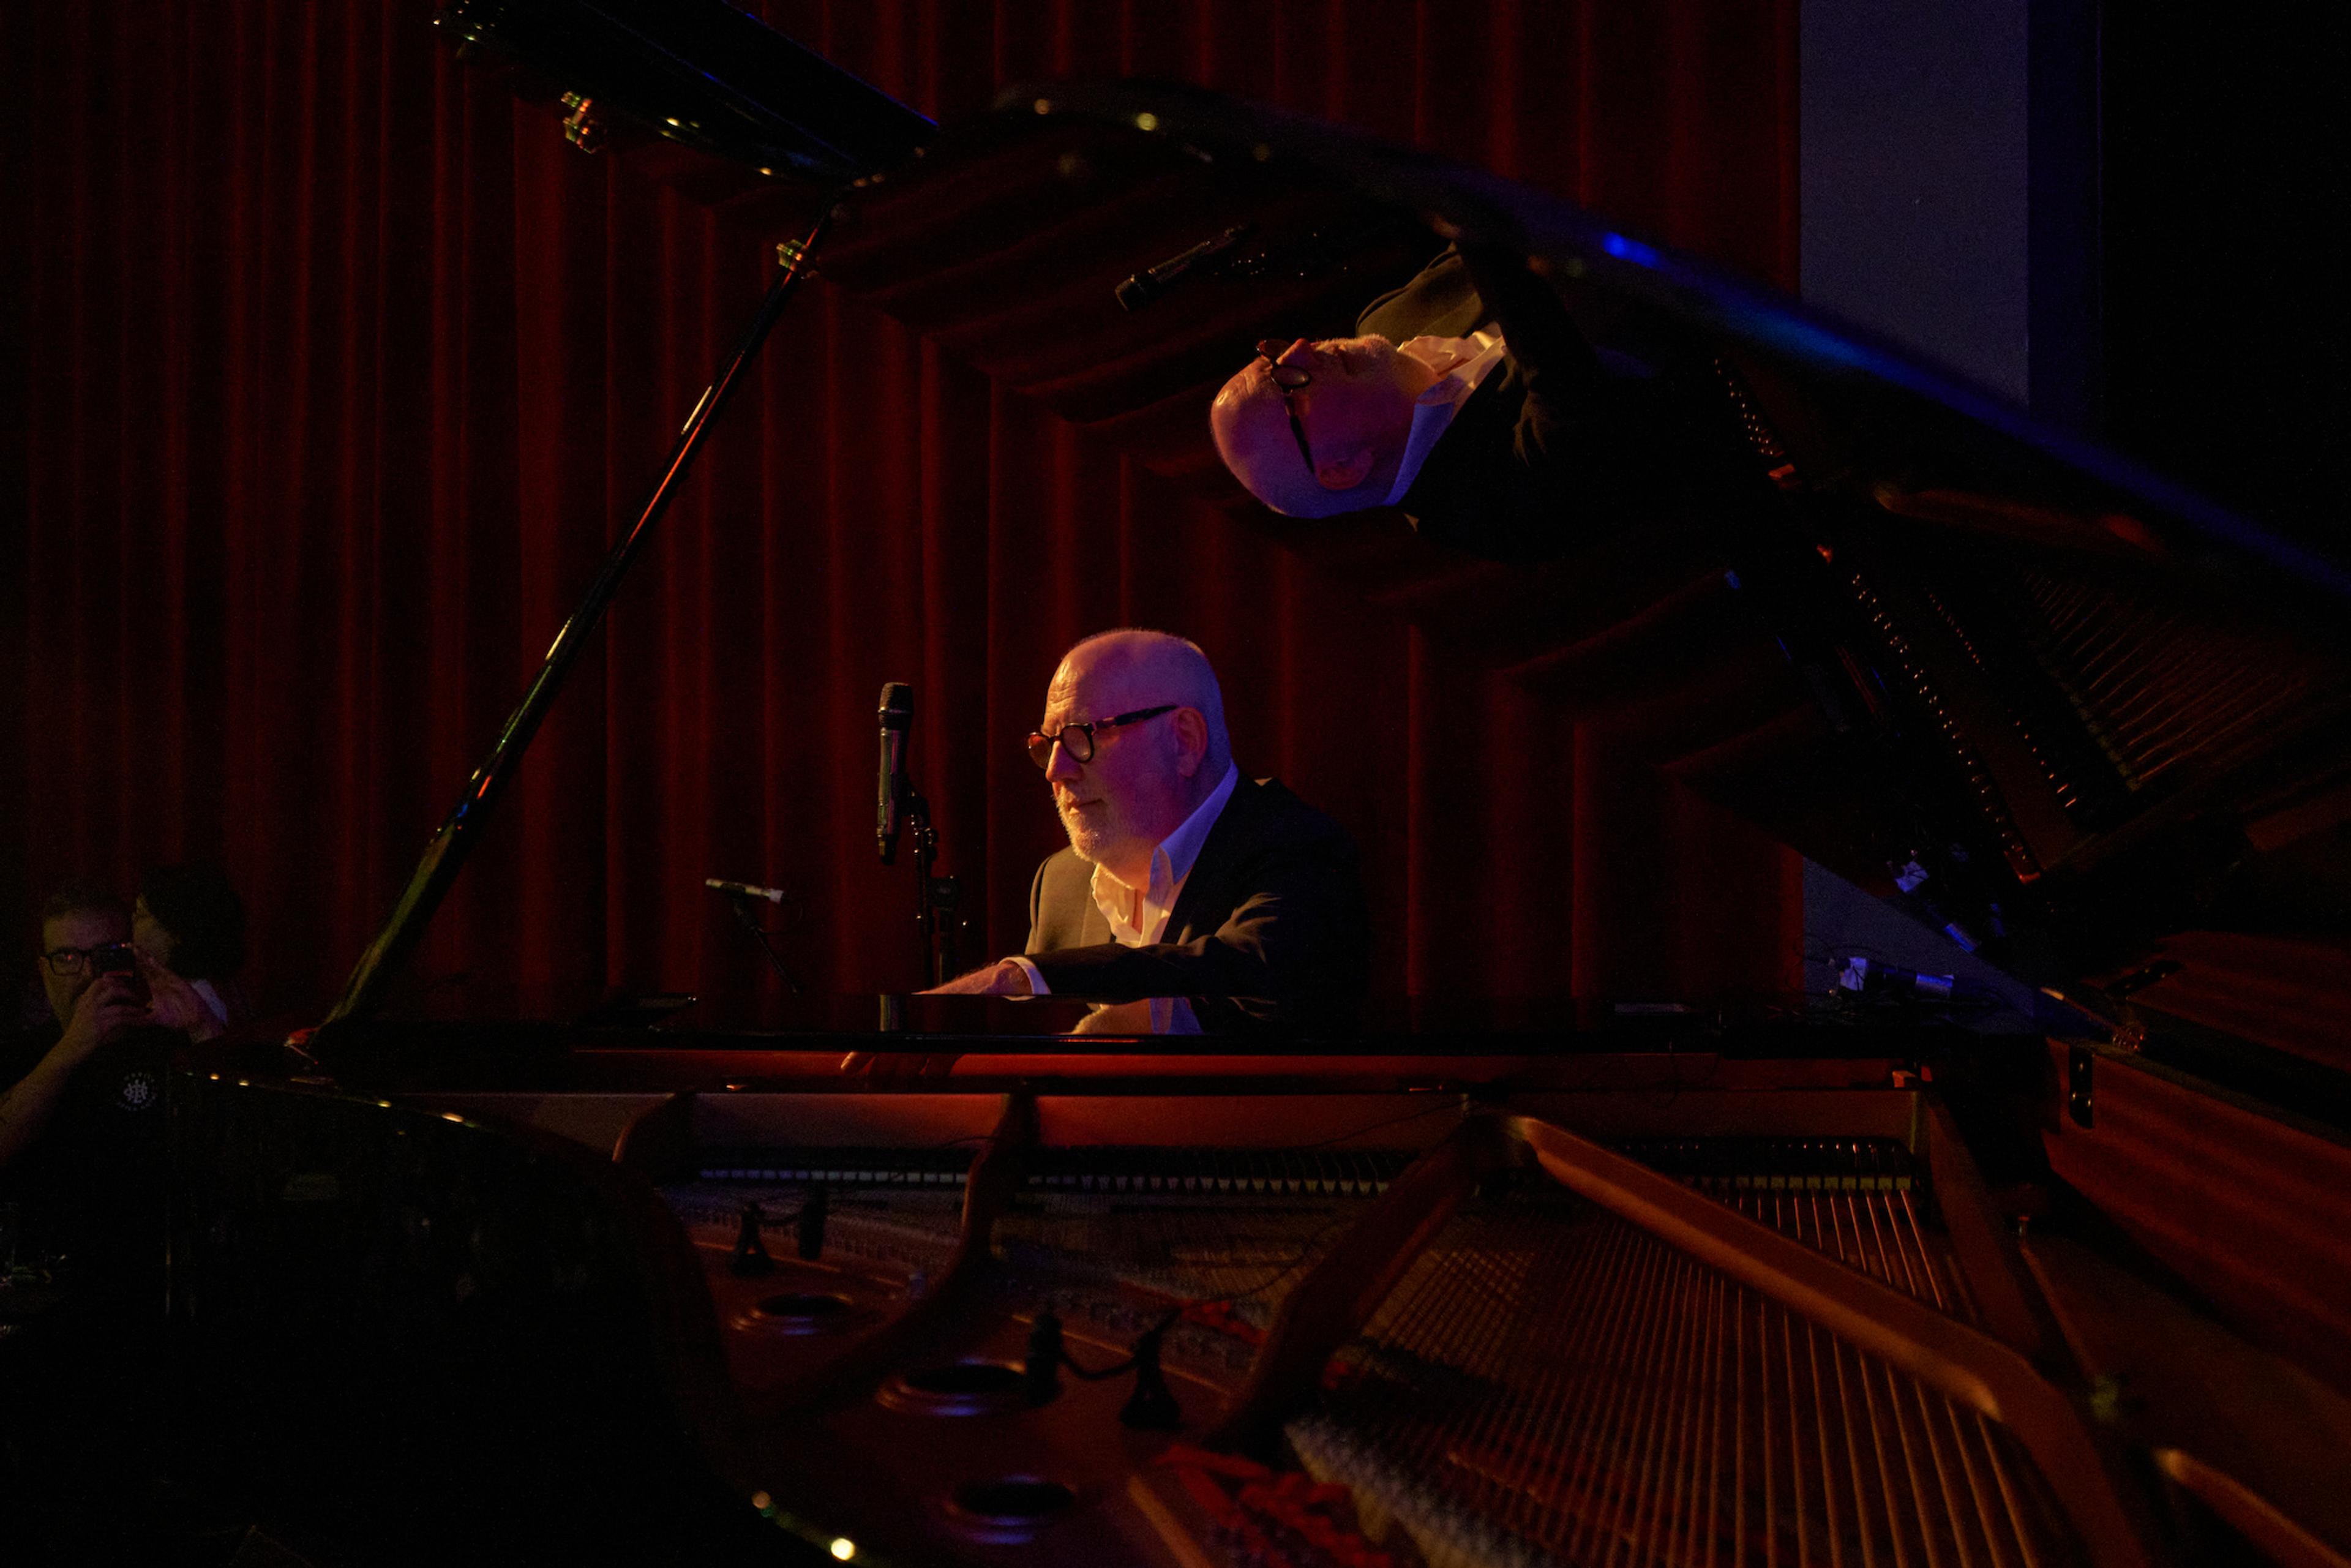 Paul Grabowsky performing on the piano